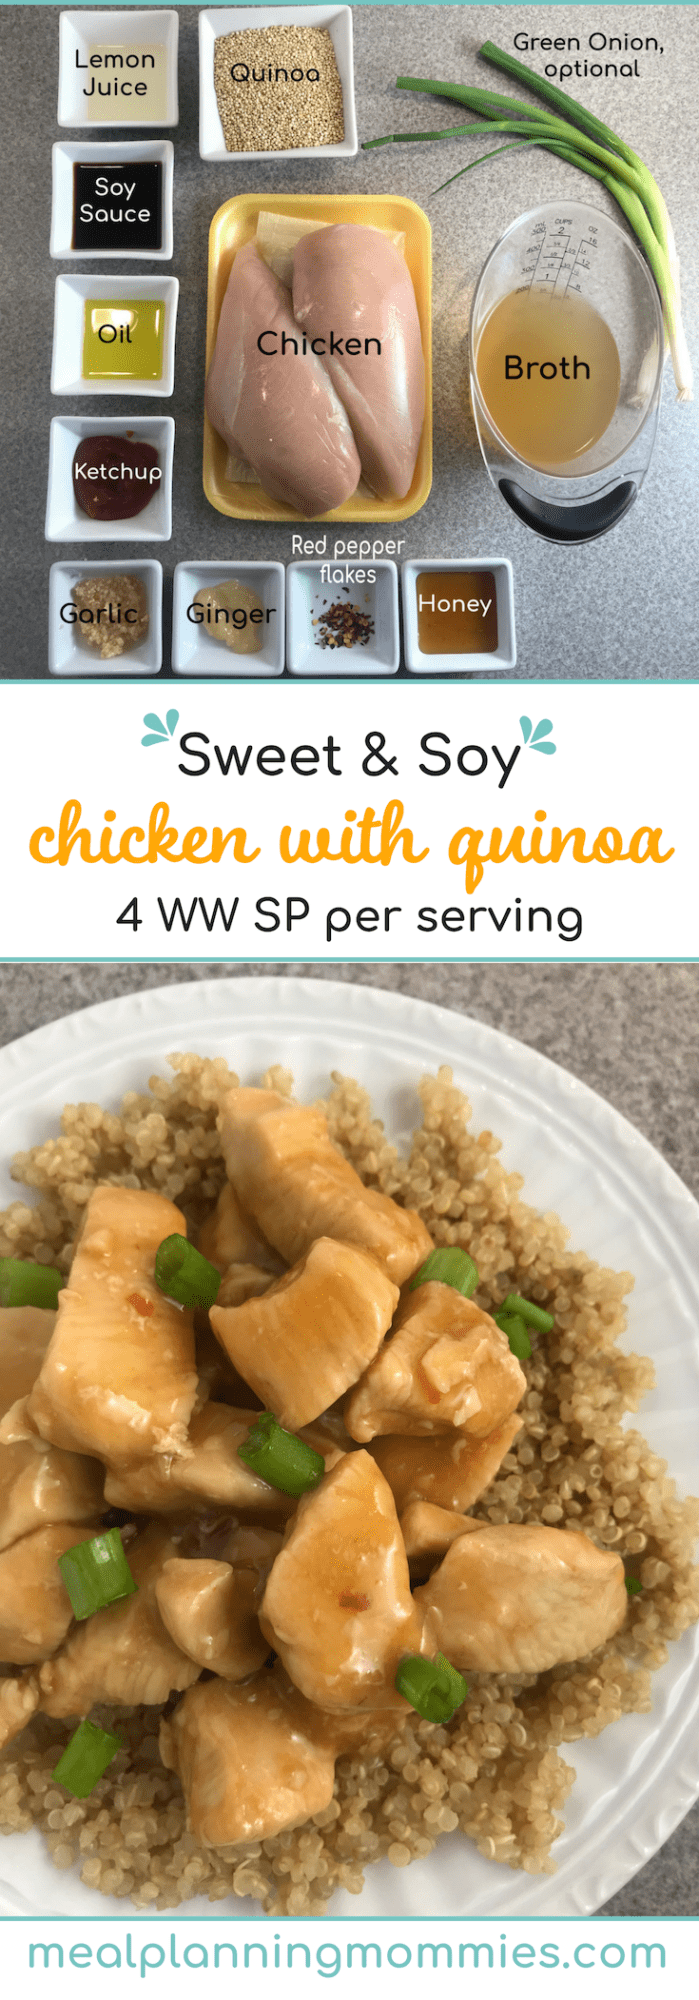 Sweet and Soy Chicken with Quinoa on Meal Planning Mommies - Just 4 WW FreeStyle SmartPoints per serving!